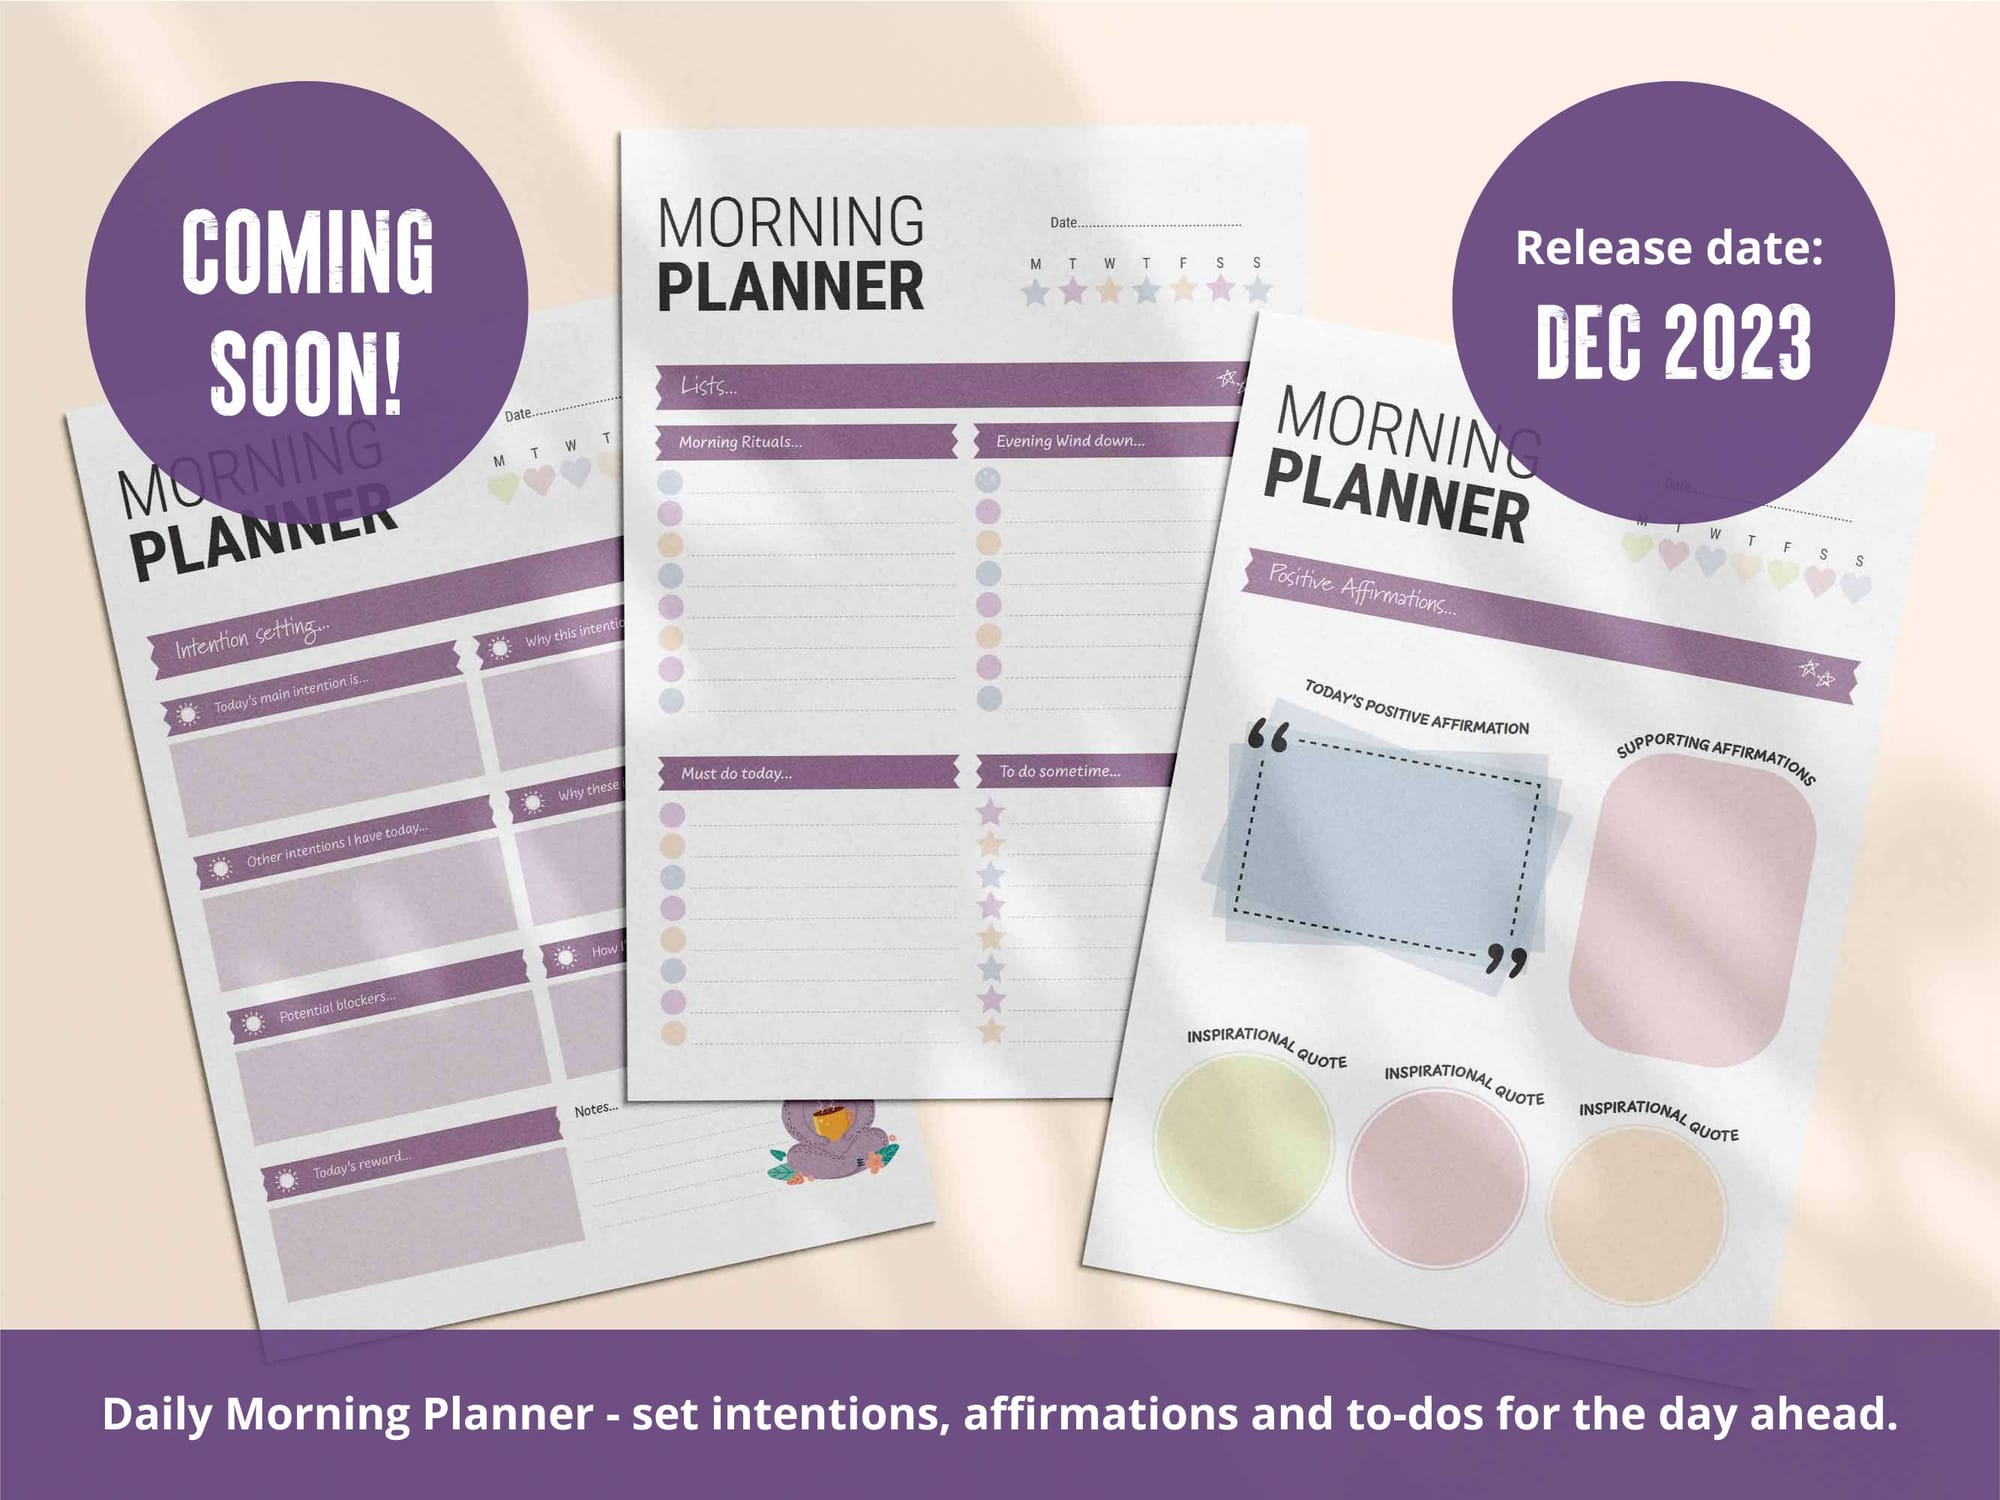 Coming soon: printable daily morning planner to set intentions affirmations and to do lists for the day.